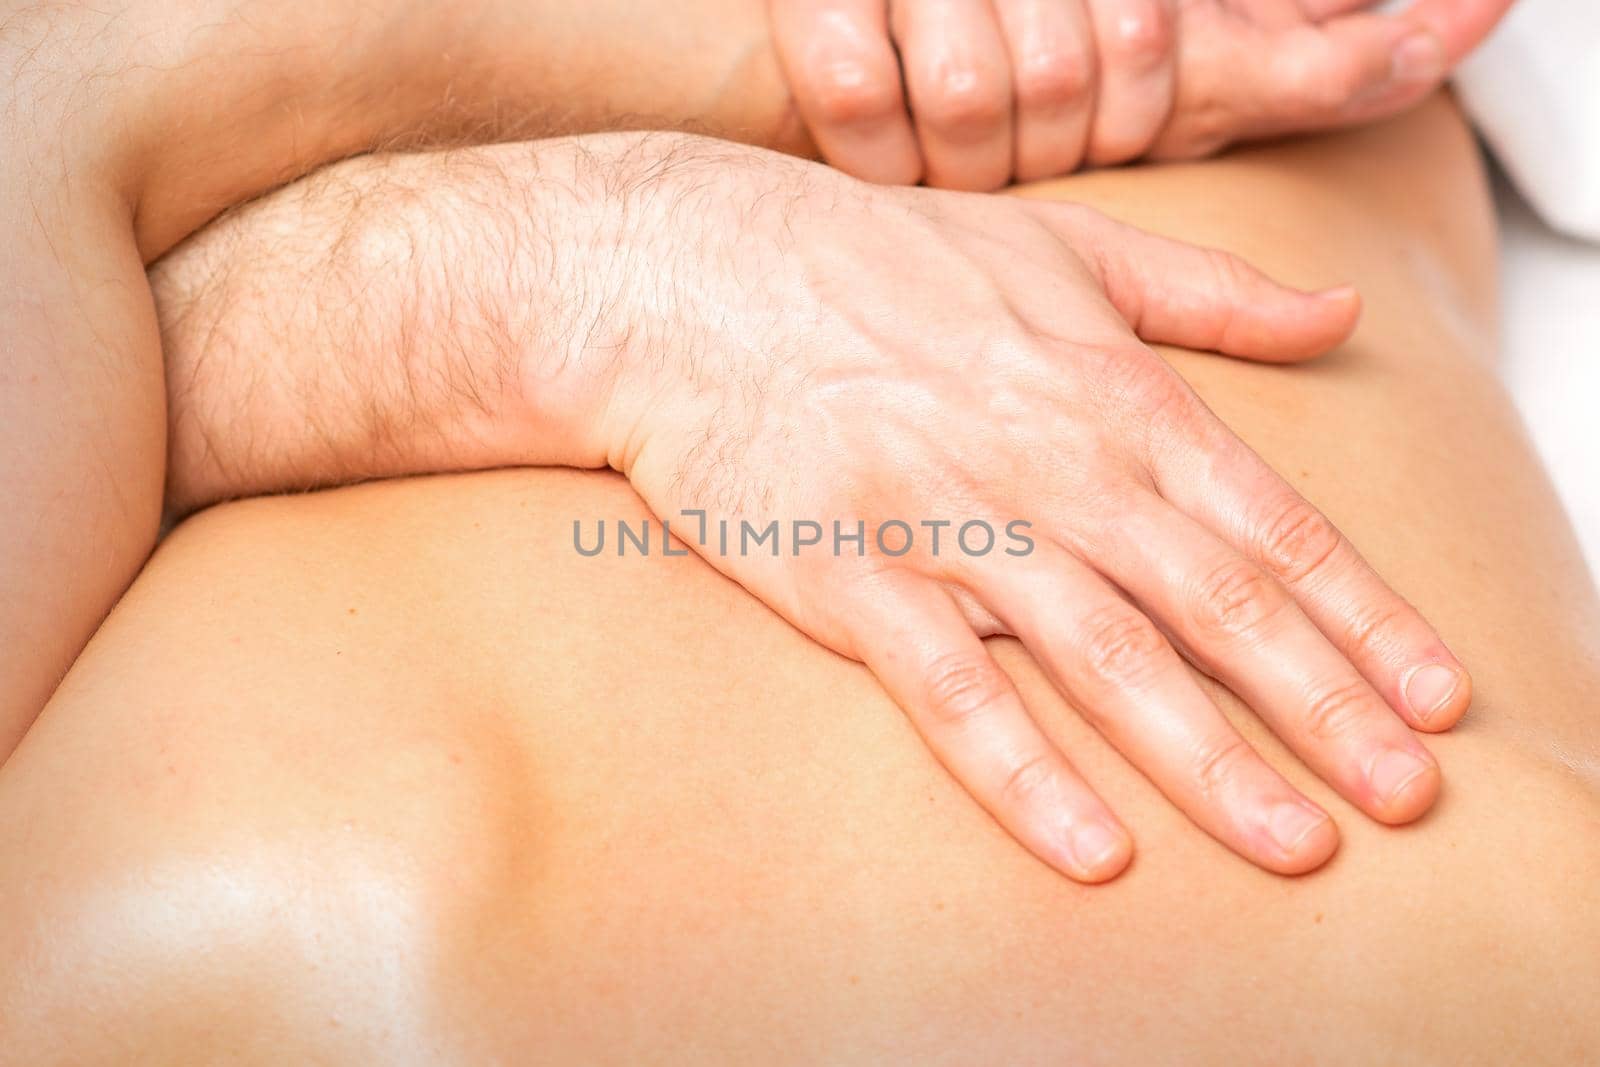 A male physiotherapist stretches the arms on the back of a man lying down, close up. by okskukuruza